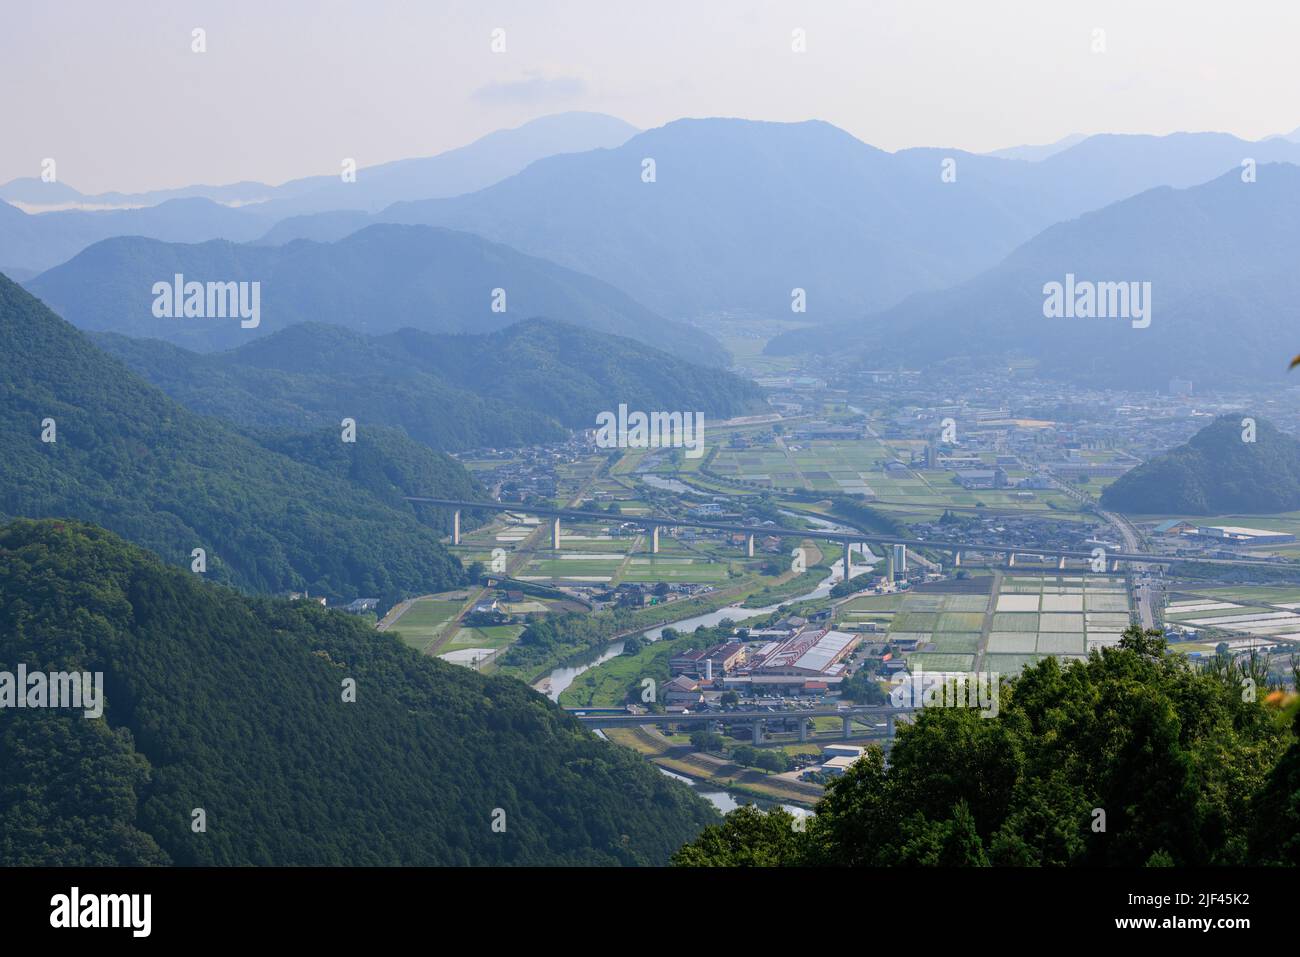 Winding river through small town in valley between blue mountains Stock Photo